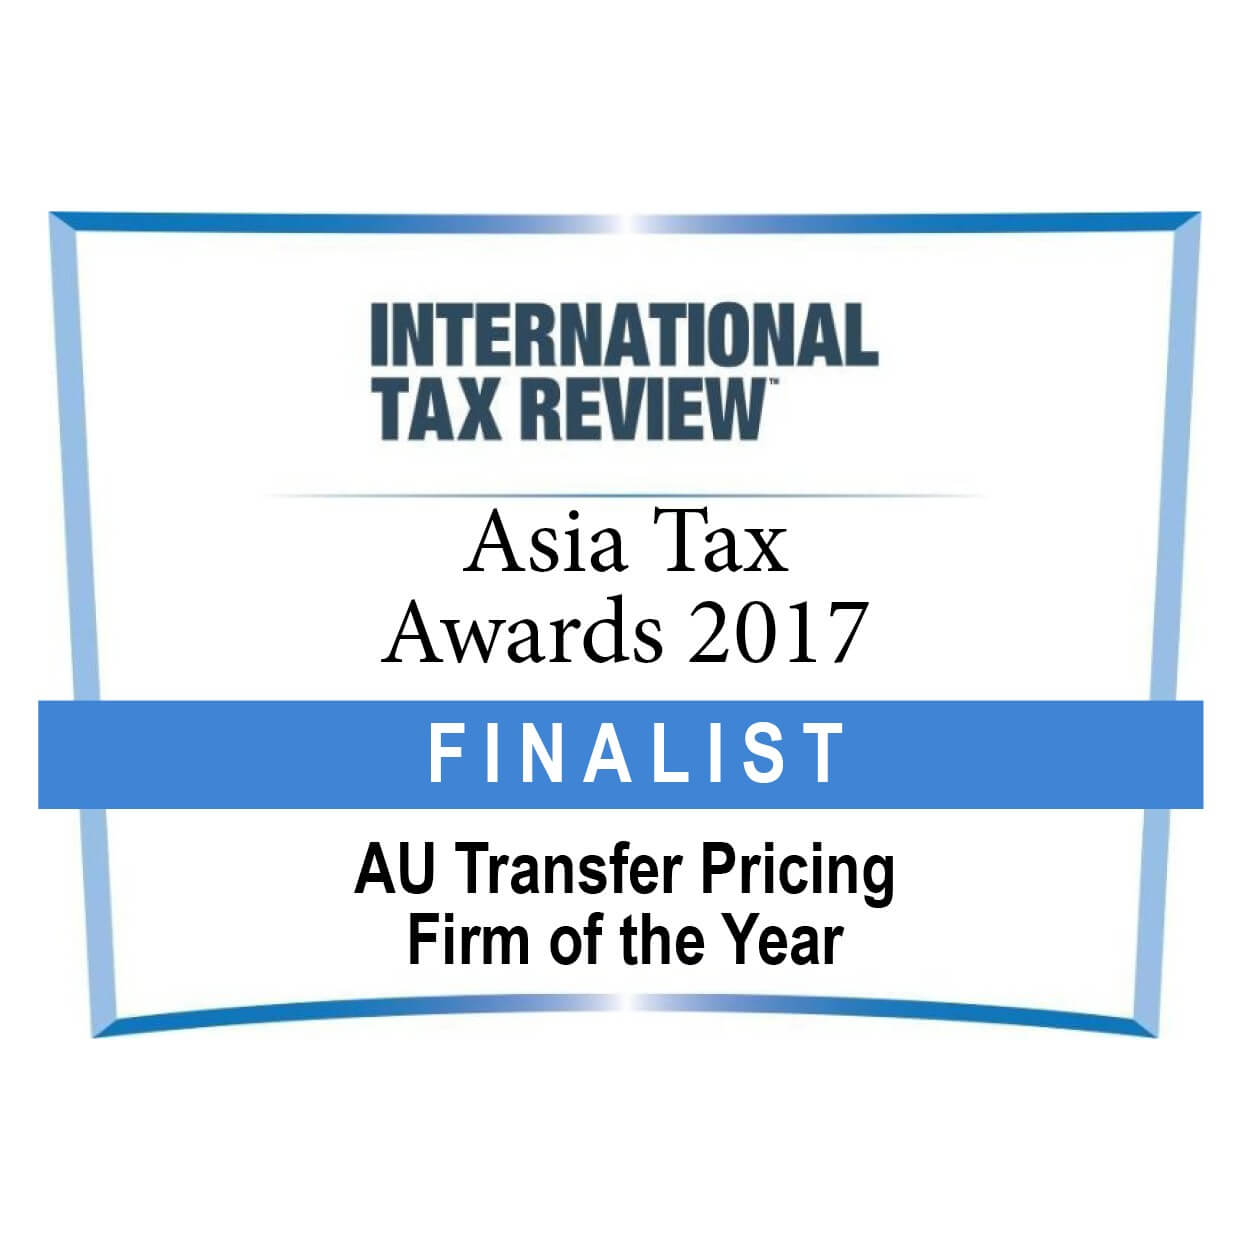 AU TP firm of the Year Asia Tax Awards FINALIST 2017